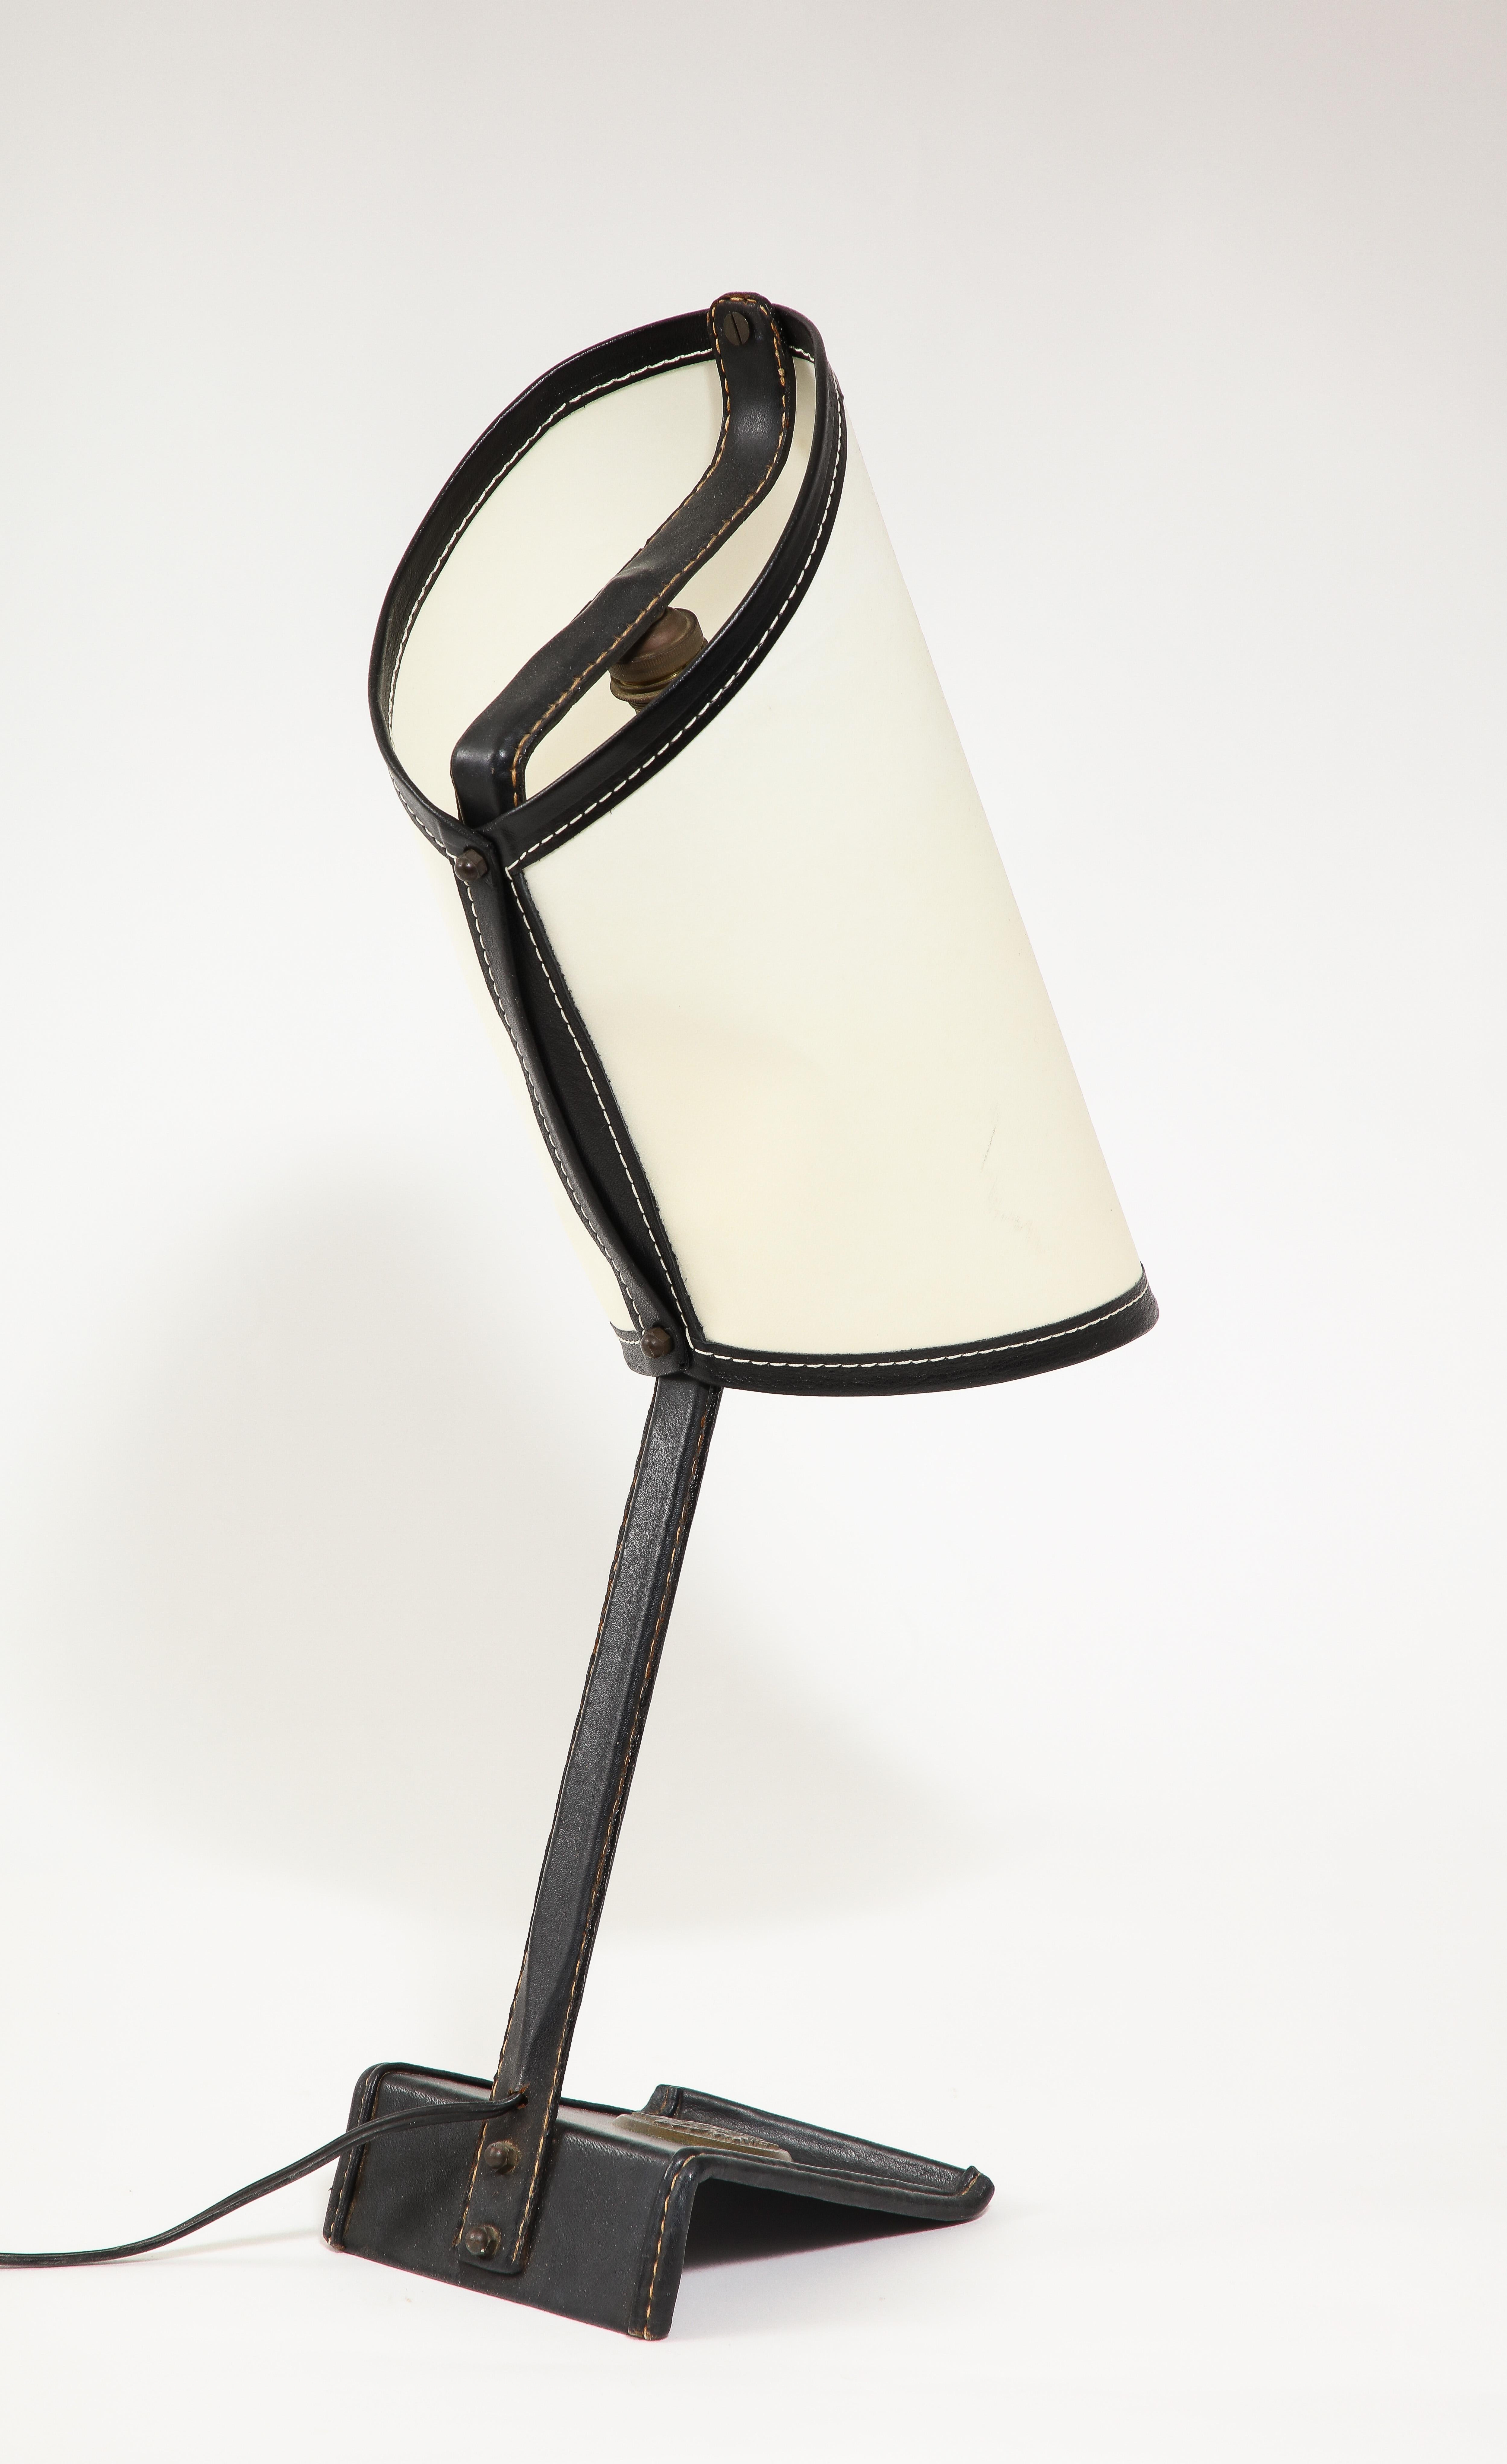 Desk lamp made for various embassies by Jacques Adnet, this one bears a bronze medallion identifying it as coming from the Canadian Embassy.
Stitched leather and parchment shade. A rare lamp in excellent condition.